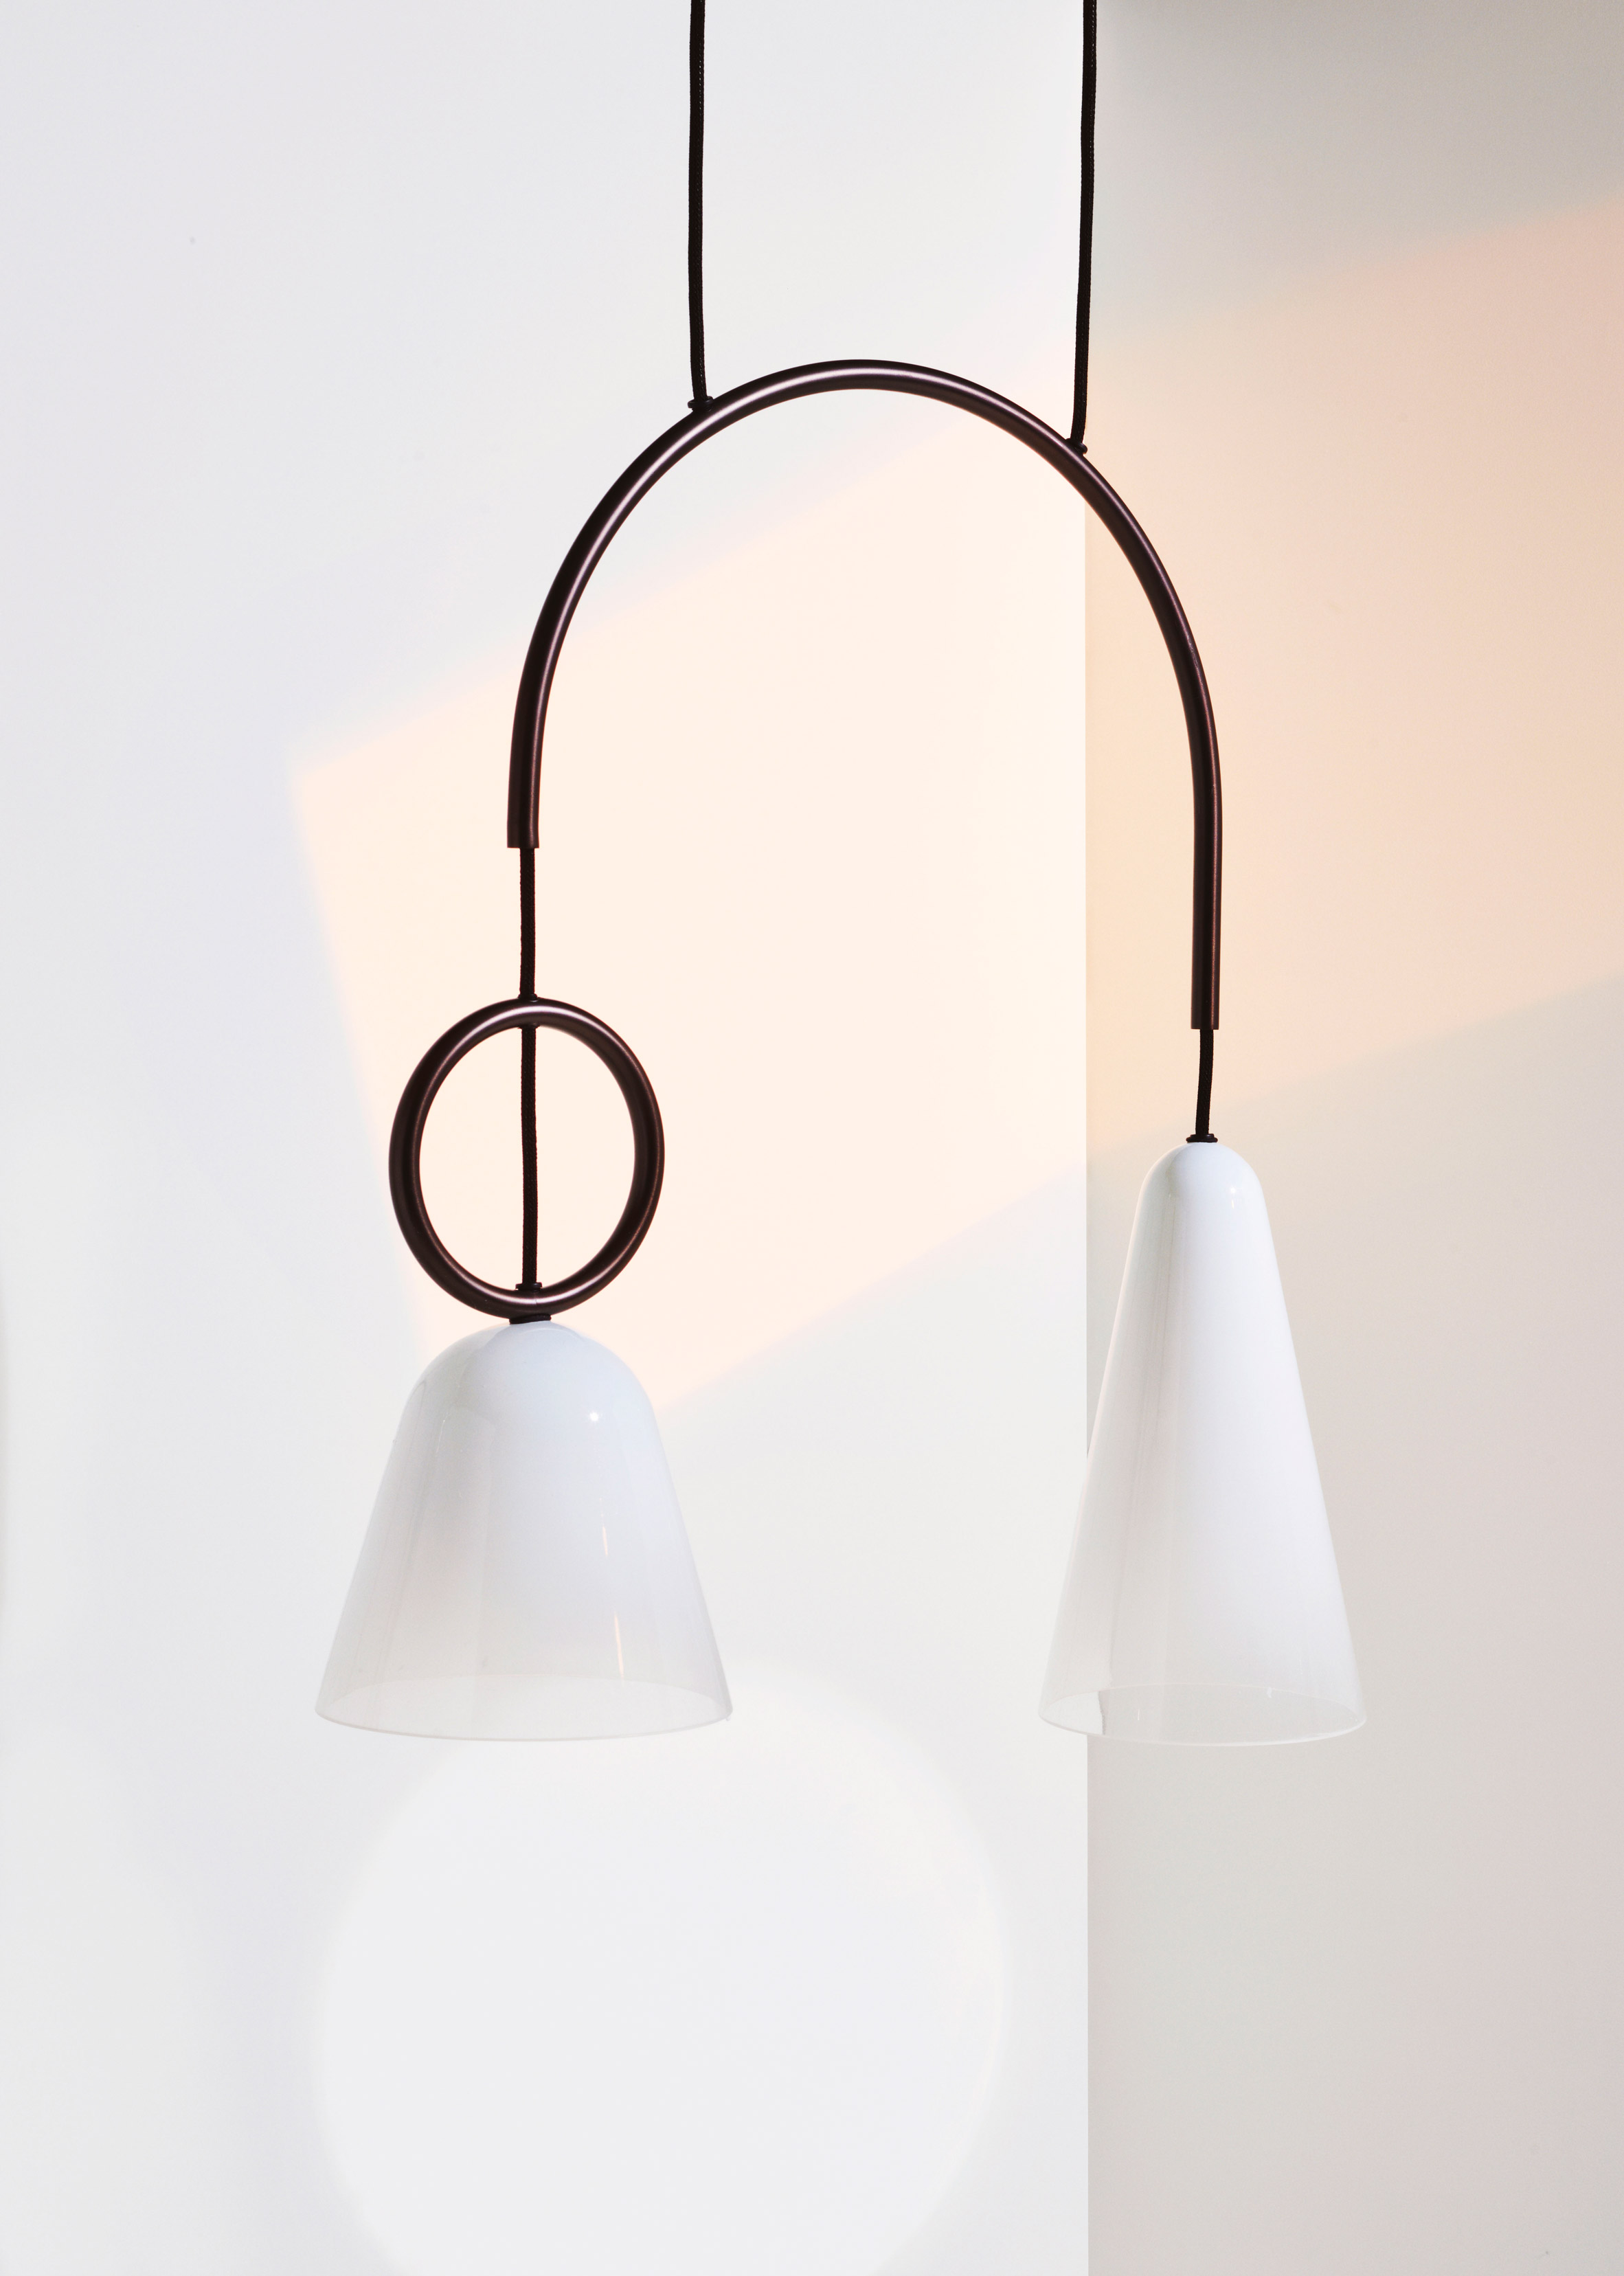 Petite Friture's Abstraction collection includes lighting and wallpaper